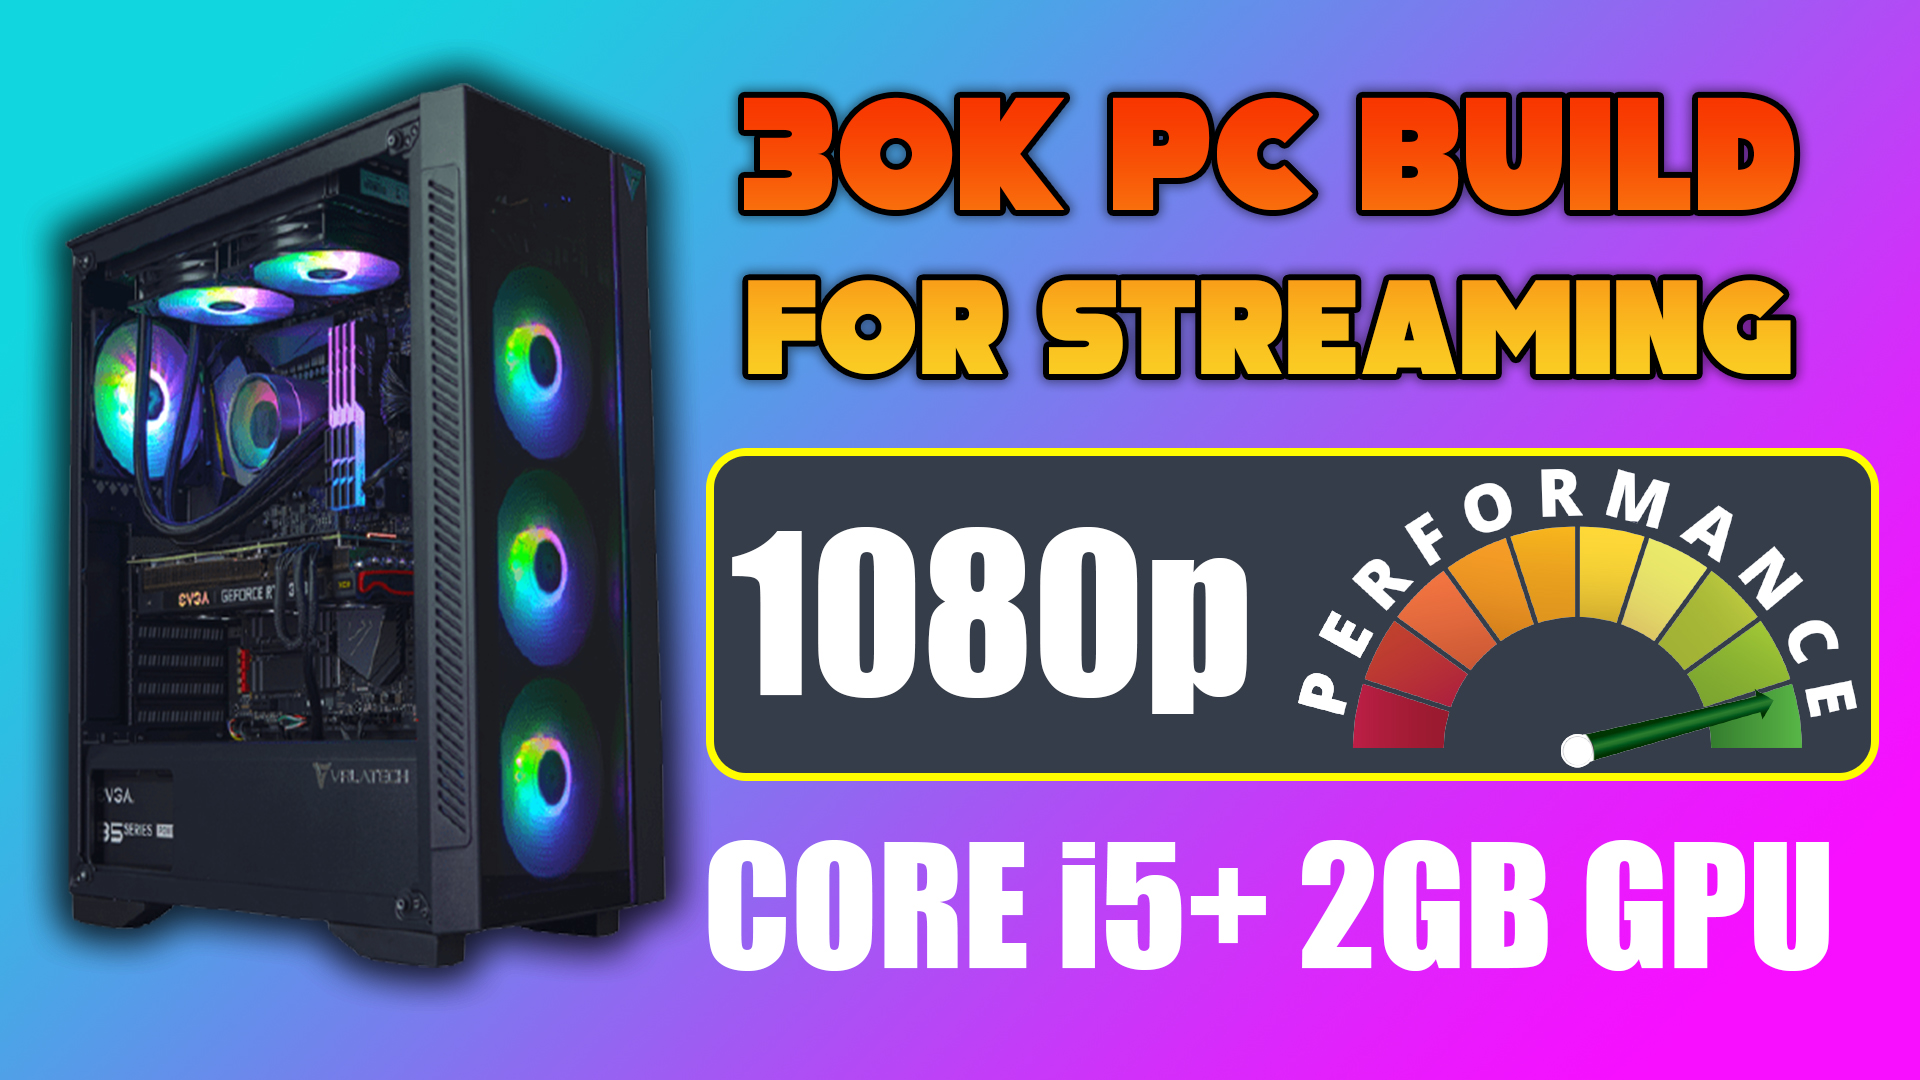 Costume Gaming Pc Build 30K for Small Bedroom